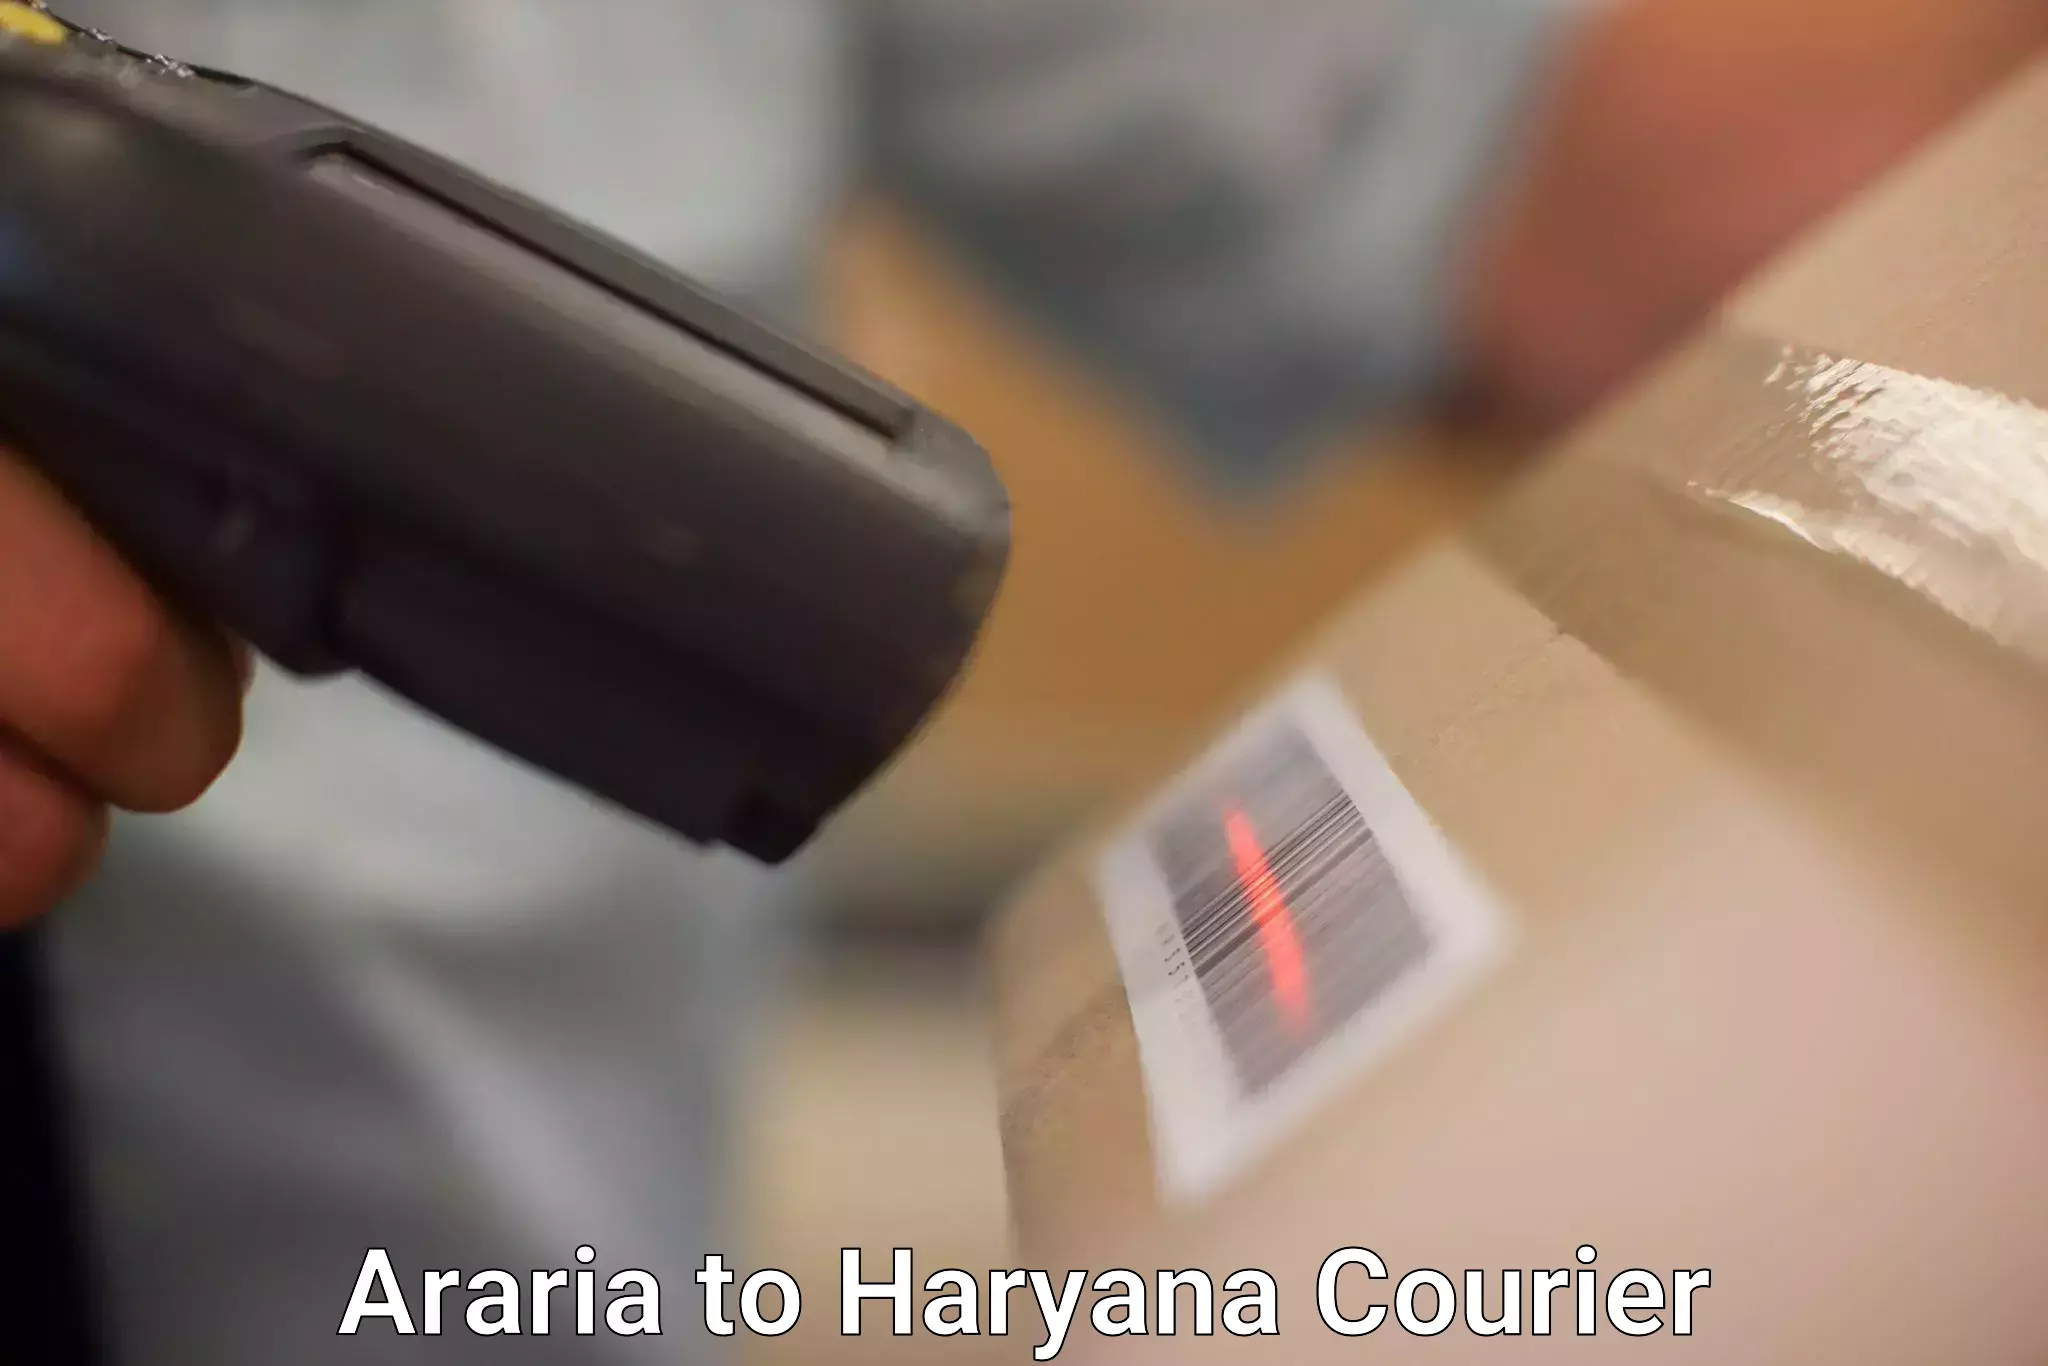 Express package handling in Araria to Gurgaon